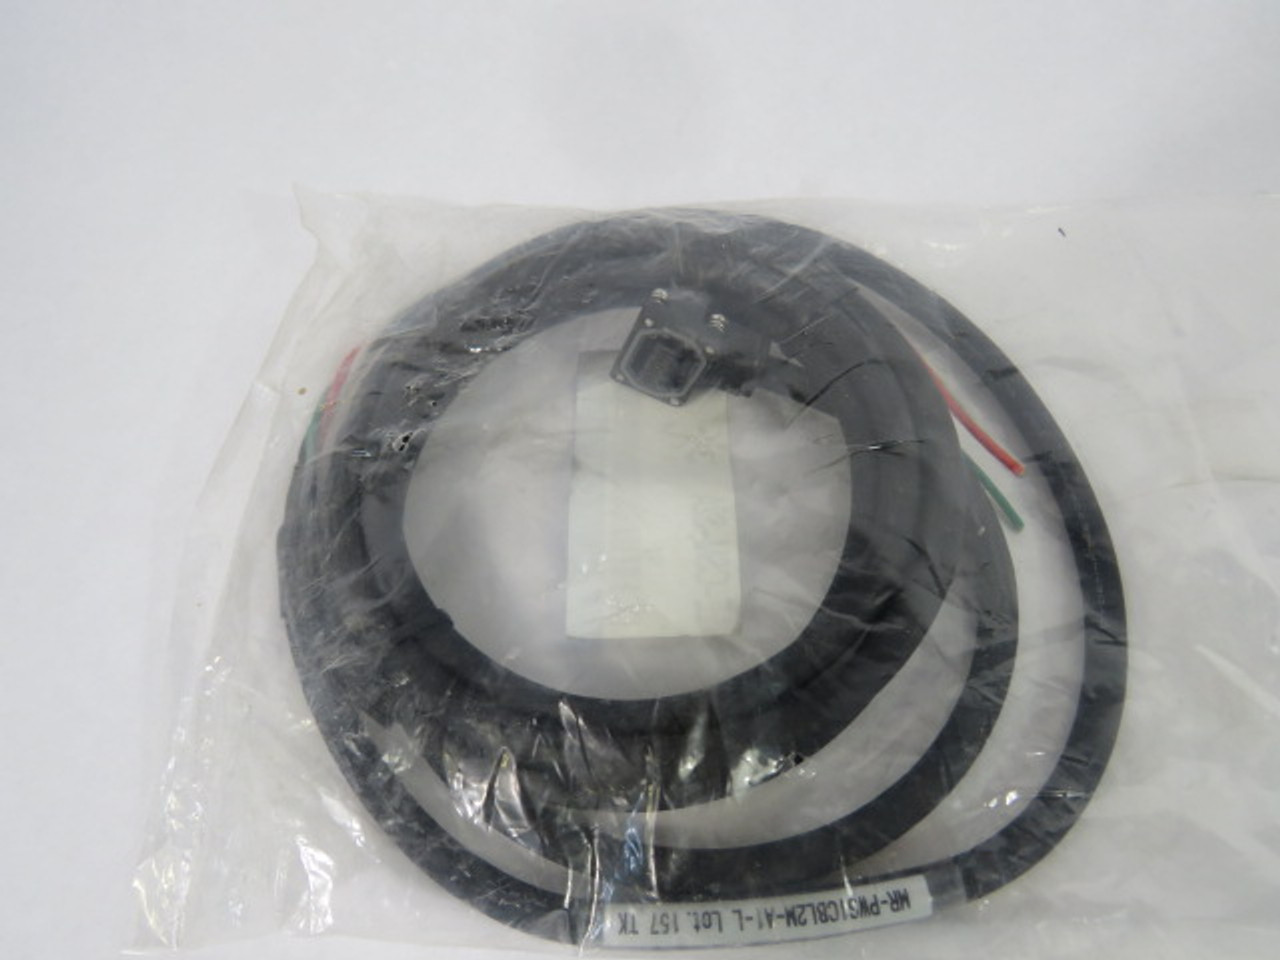 SMC LE-CSM-S2A Motor Cable for Actuator NWB